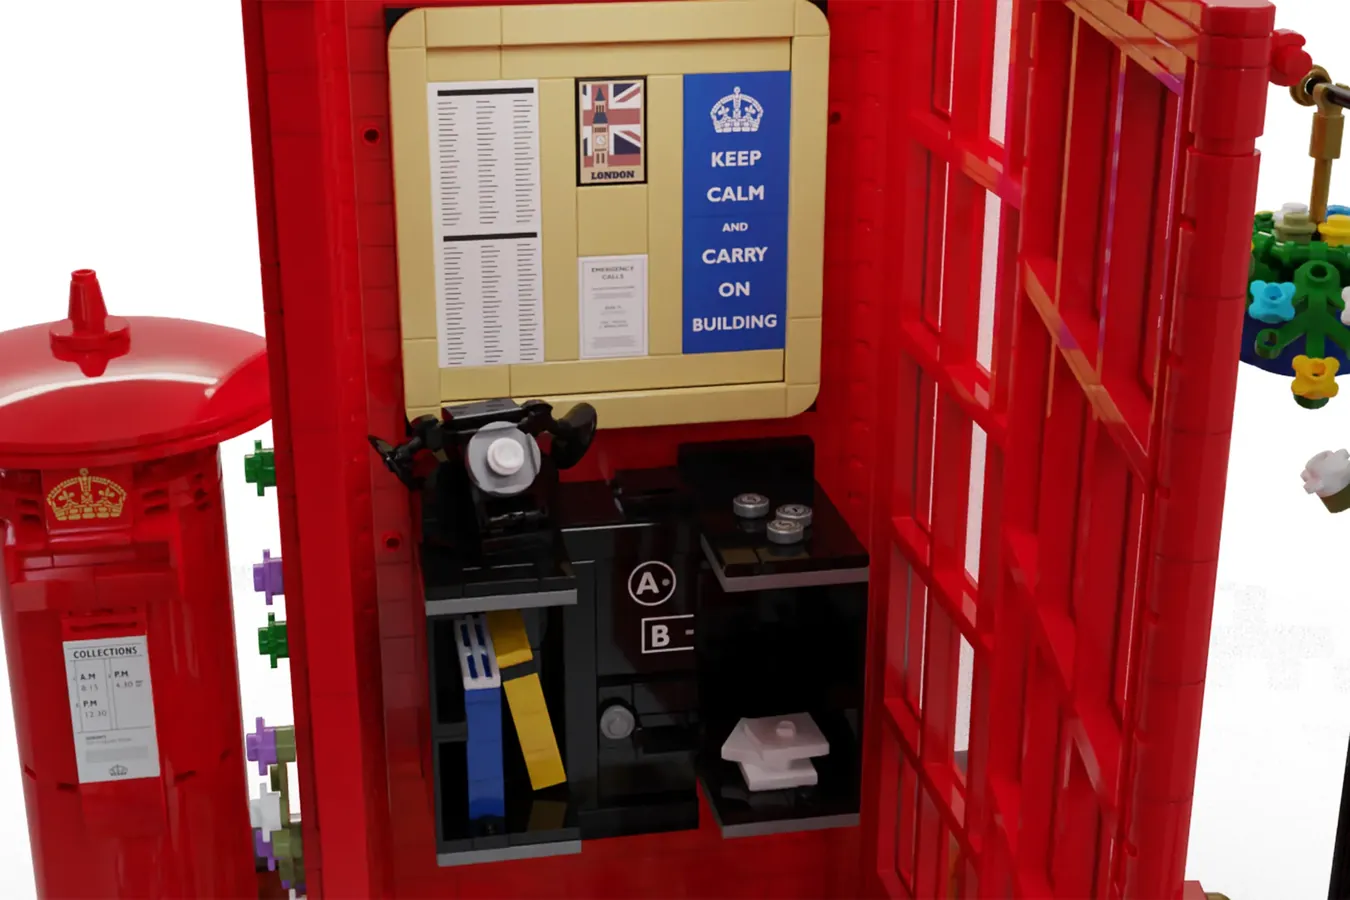 Lego® London's Red Telephone Booth